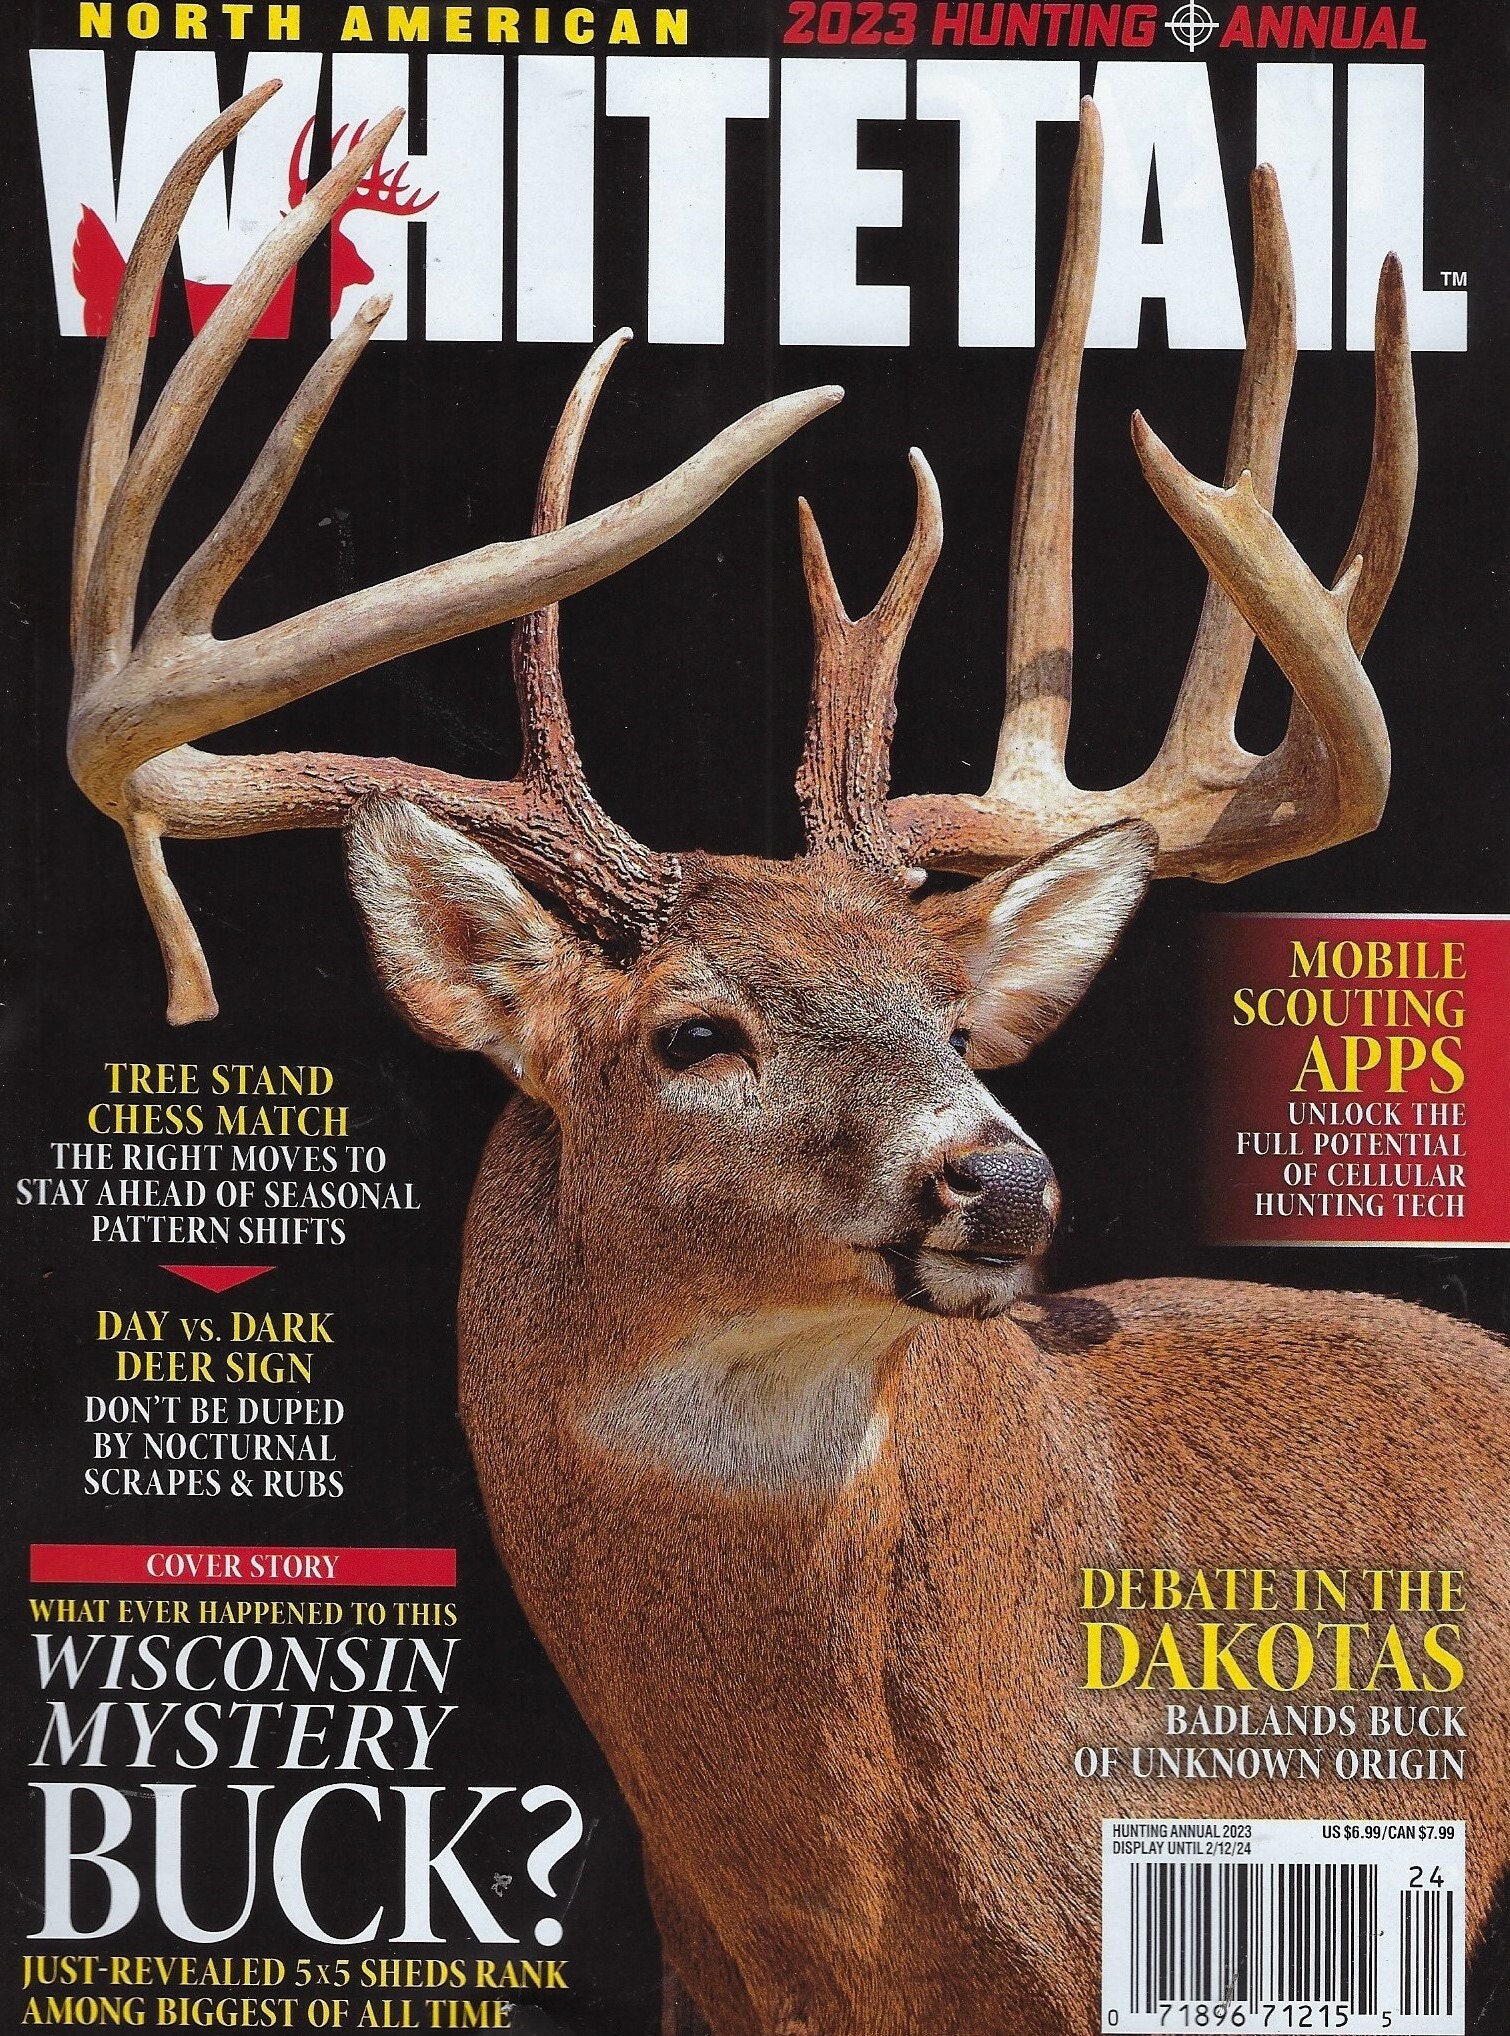 North American Whitetail Magazine ( Hunting Annual) 2023